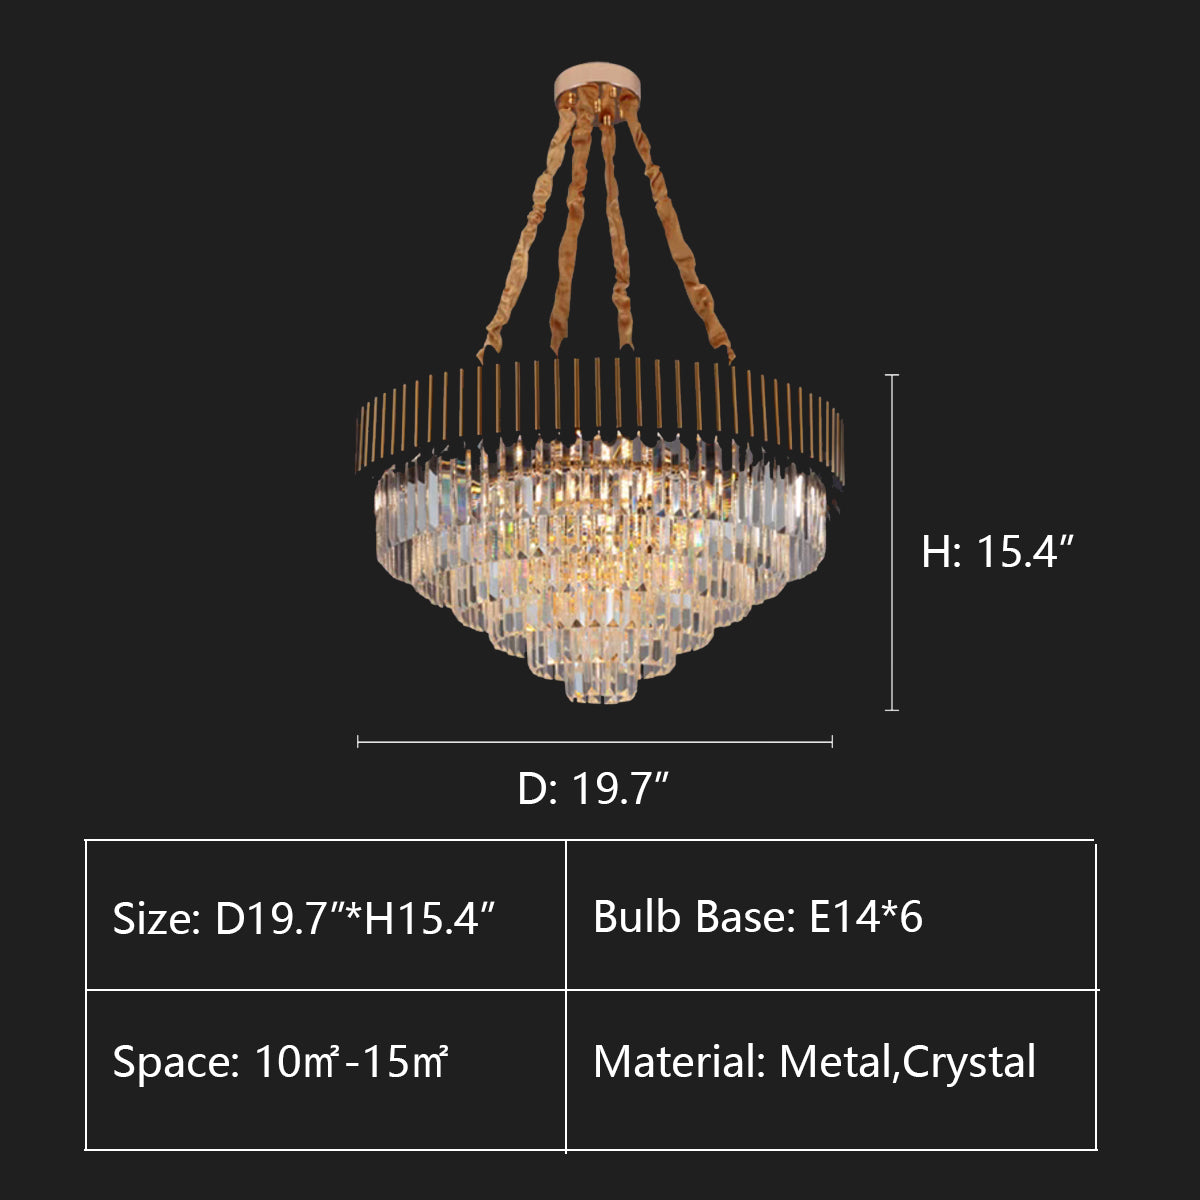 Round: D19.7"*H15.4" chandelier,chandeliers,crystal,metal,clear crystal,gold metal,branch,multi-tier,tiers,ceiling,living room,dining room,overswized,round,rectangle,oval